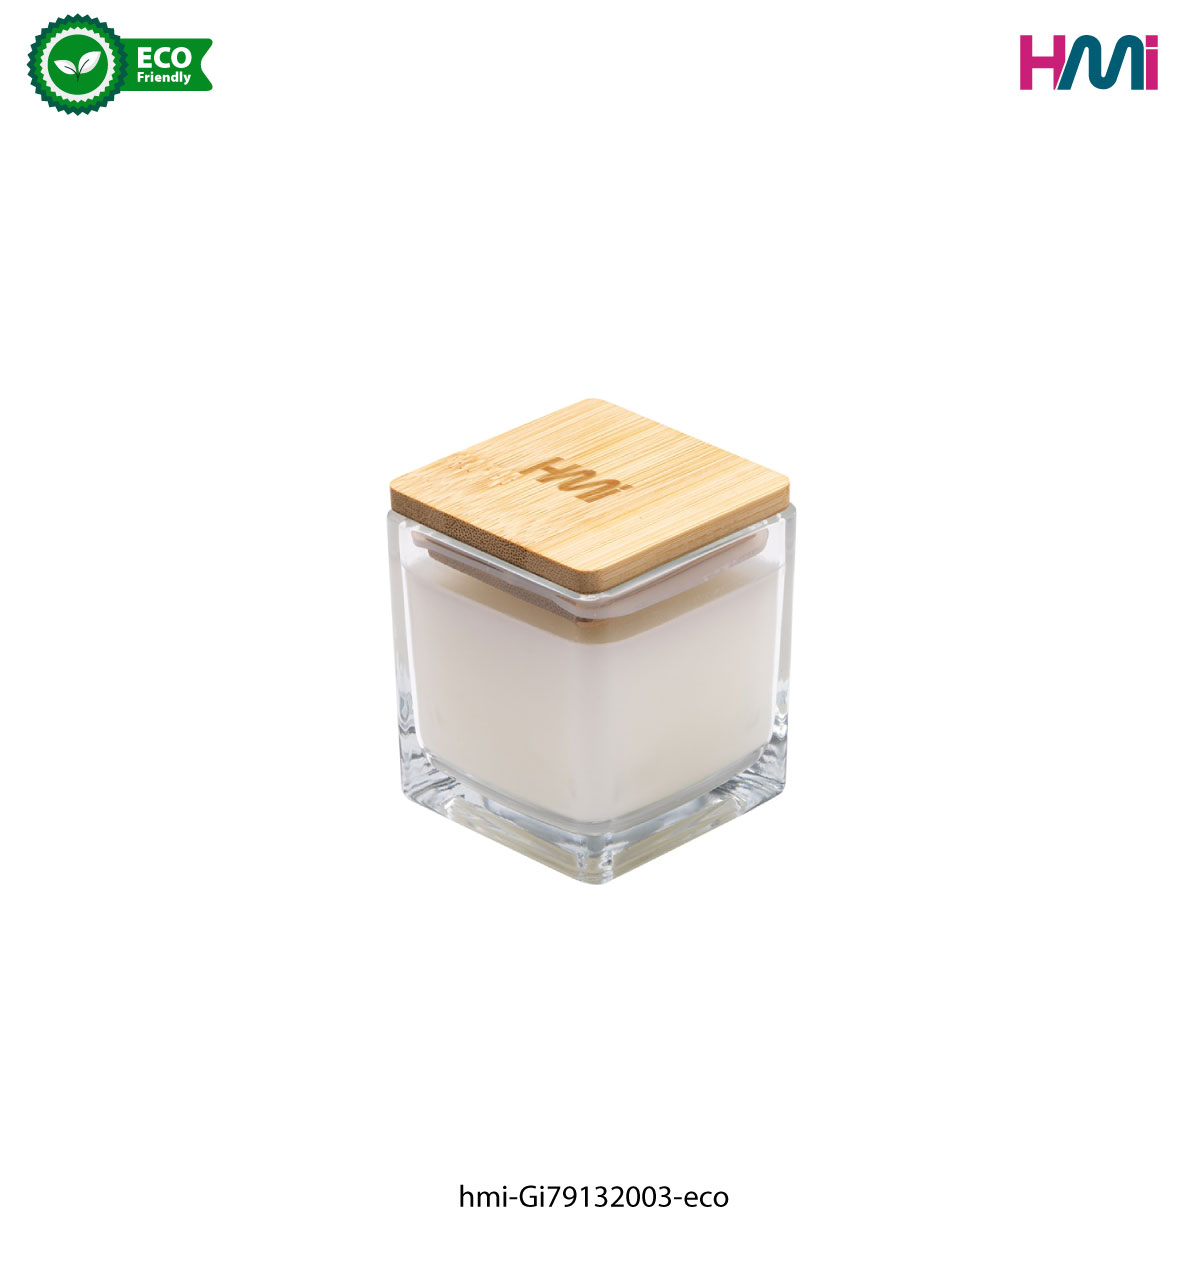 Order Promotional Eco-friendly candle printed with logo with fast shipping in Germany at hmi-ad.com | Order eco friendly candle with logo in Germany to HMi | hmi-Gi79132003-eco